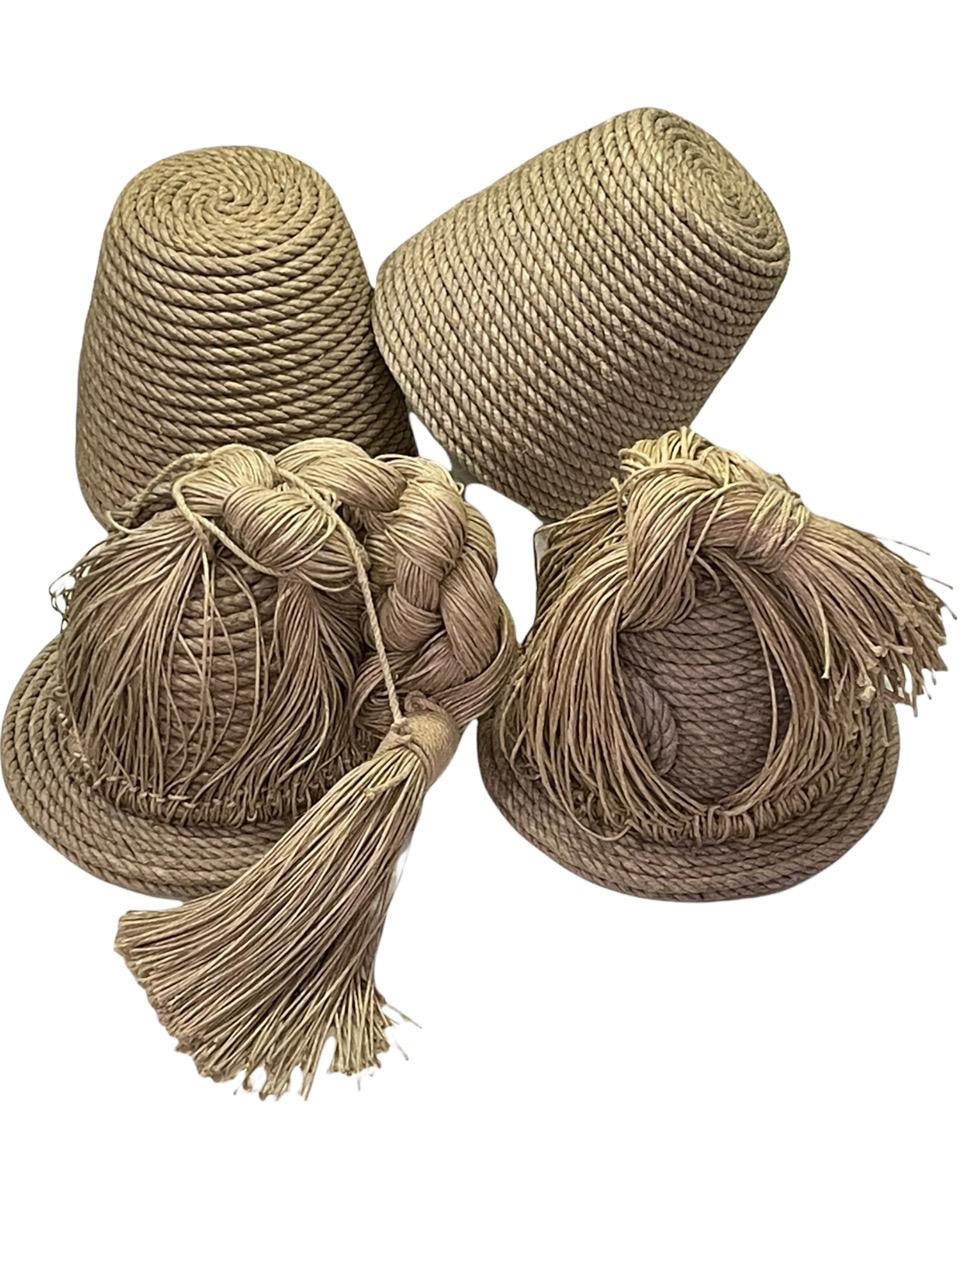 Pair of Contemporary 21st Century French Christian Astuguevieille Jute Rope Co 8